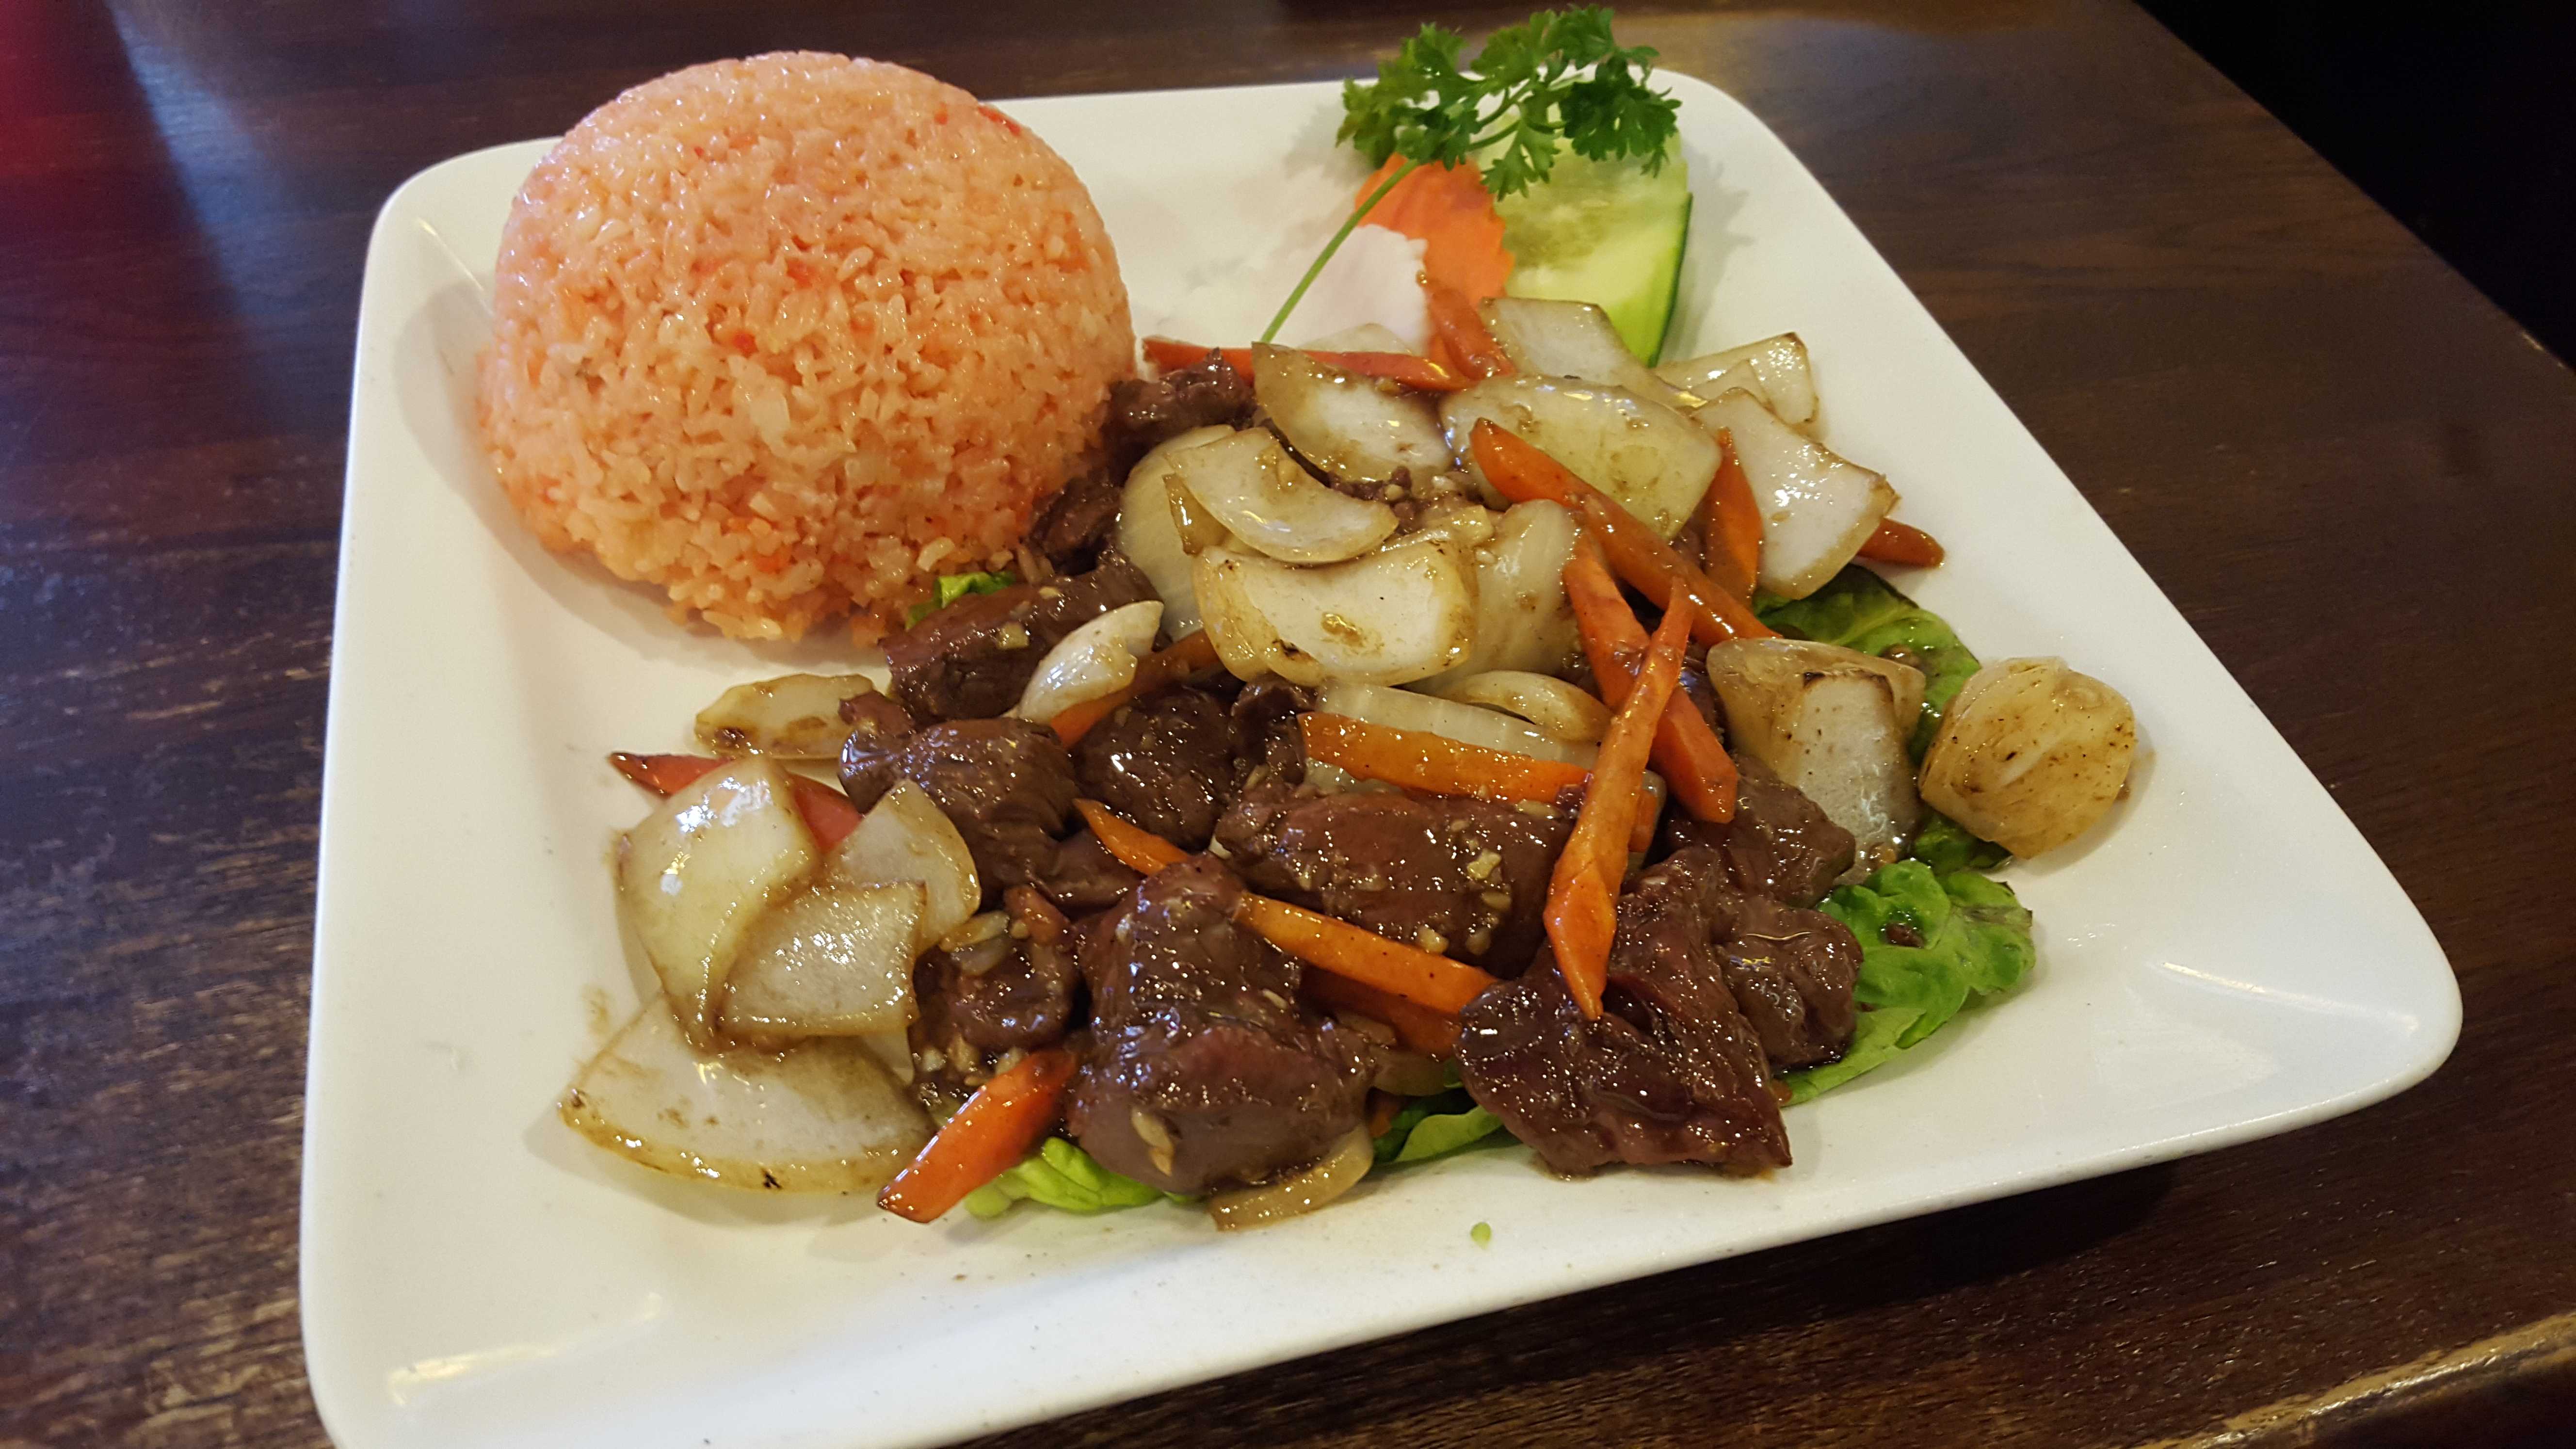 The shaken beef dish features chopped beef, onions and carrots seasoned with a house sauce. The soft and sticky red rice is simply fried rice. Photo by Courtney Stringfellow